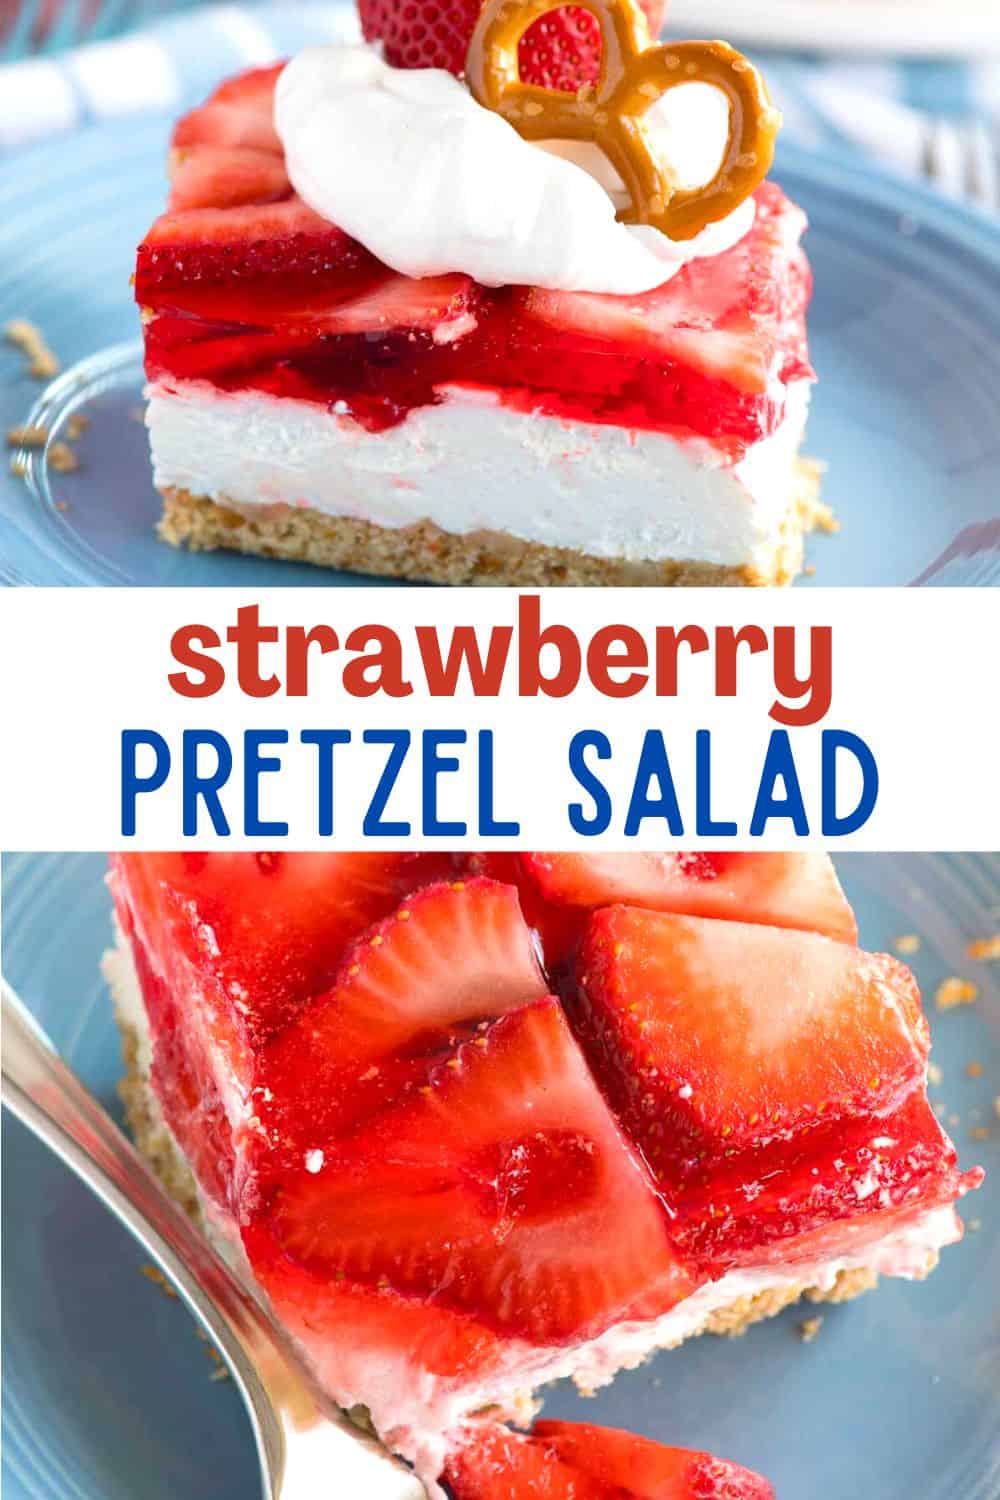 Strawberry pretzel salad is an easy dessert with a buttery pretzel crust and a no-bake cheesecake layer topped with fresh strawberries and Jell-O. A delicious make-ahead dessert!